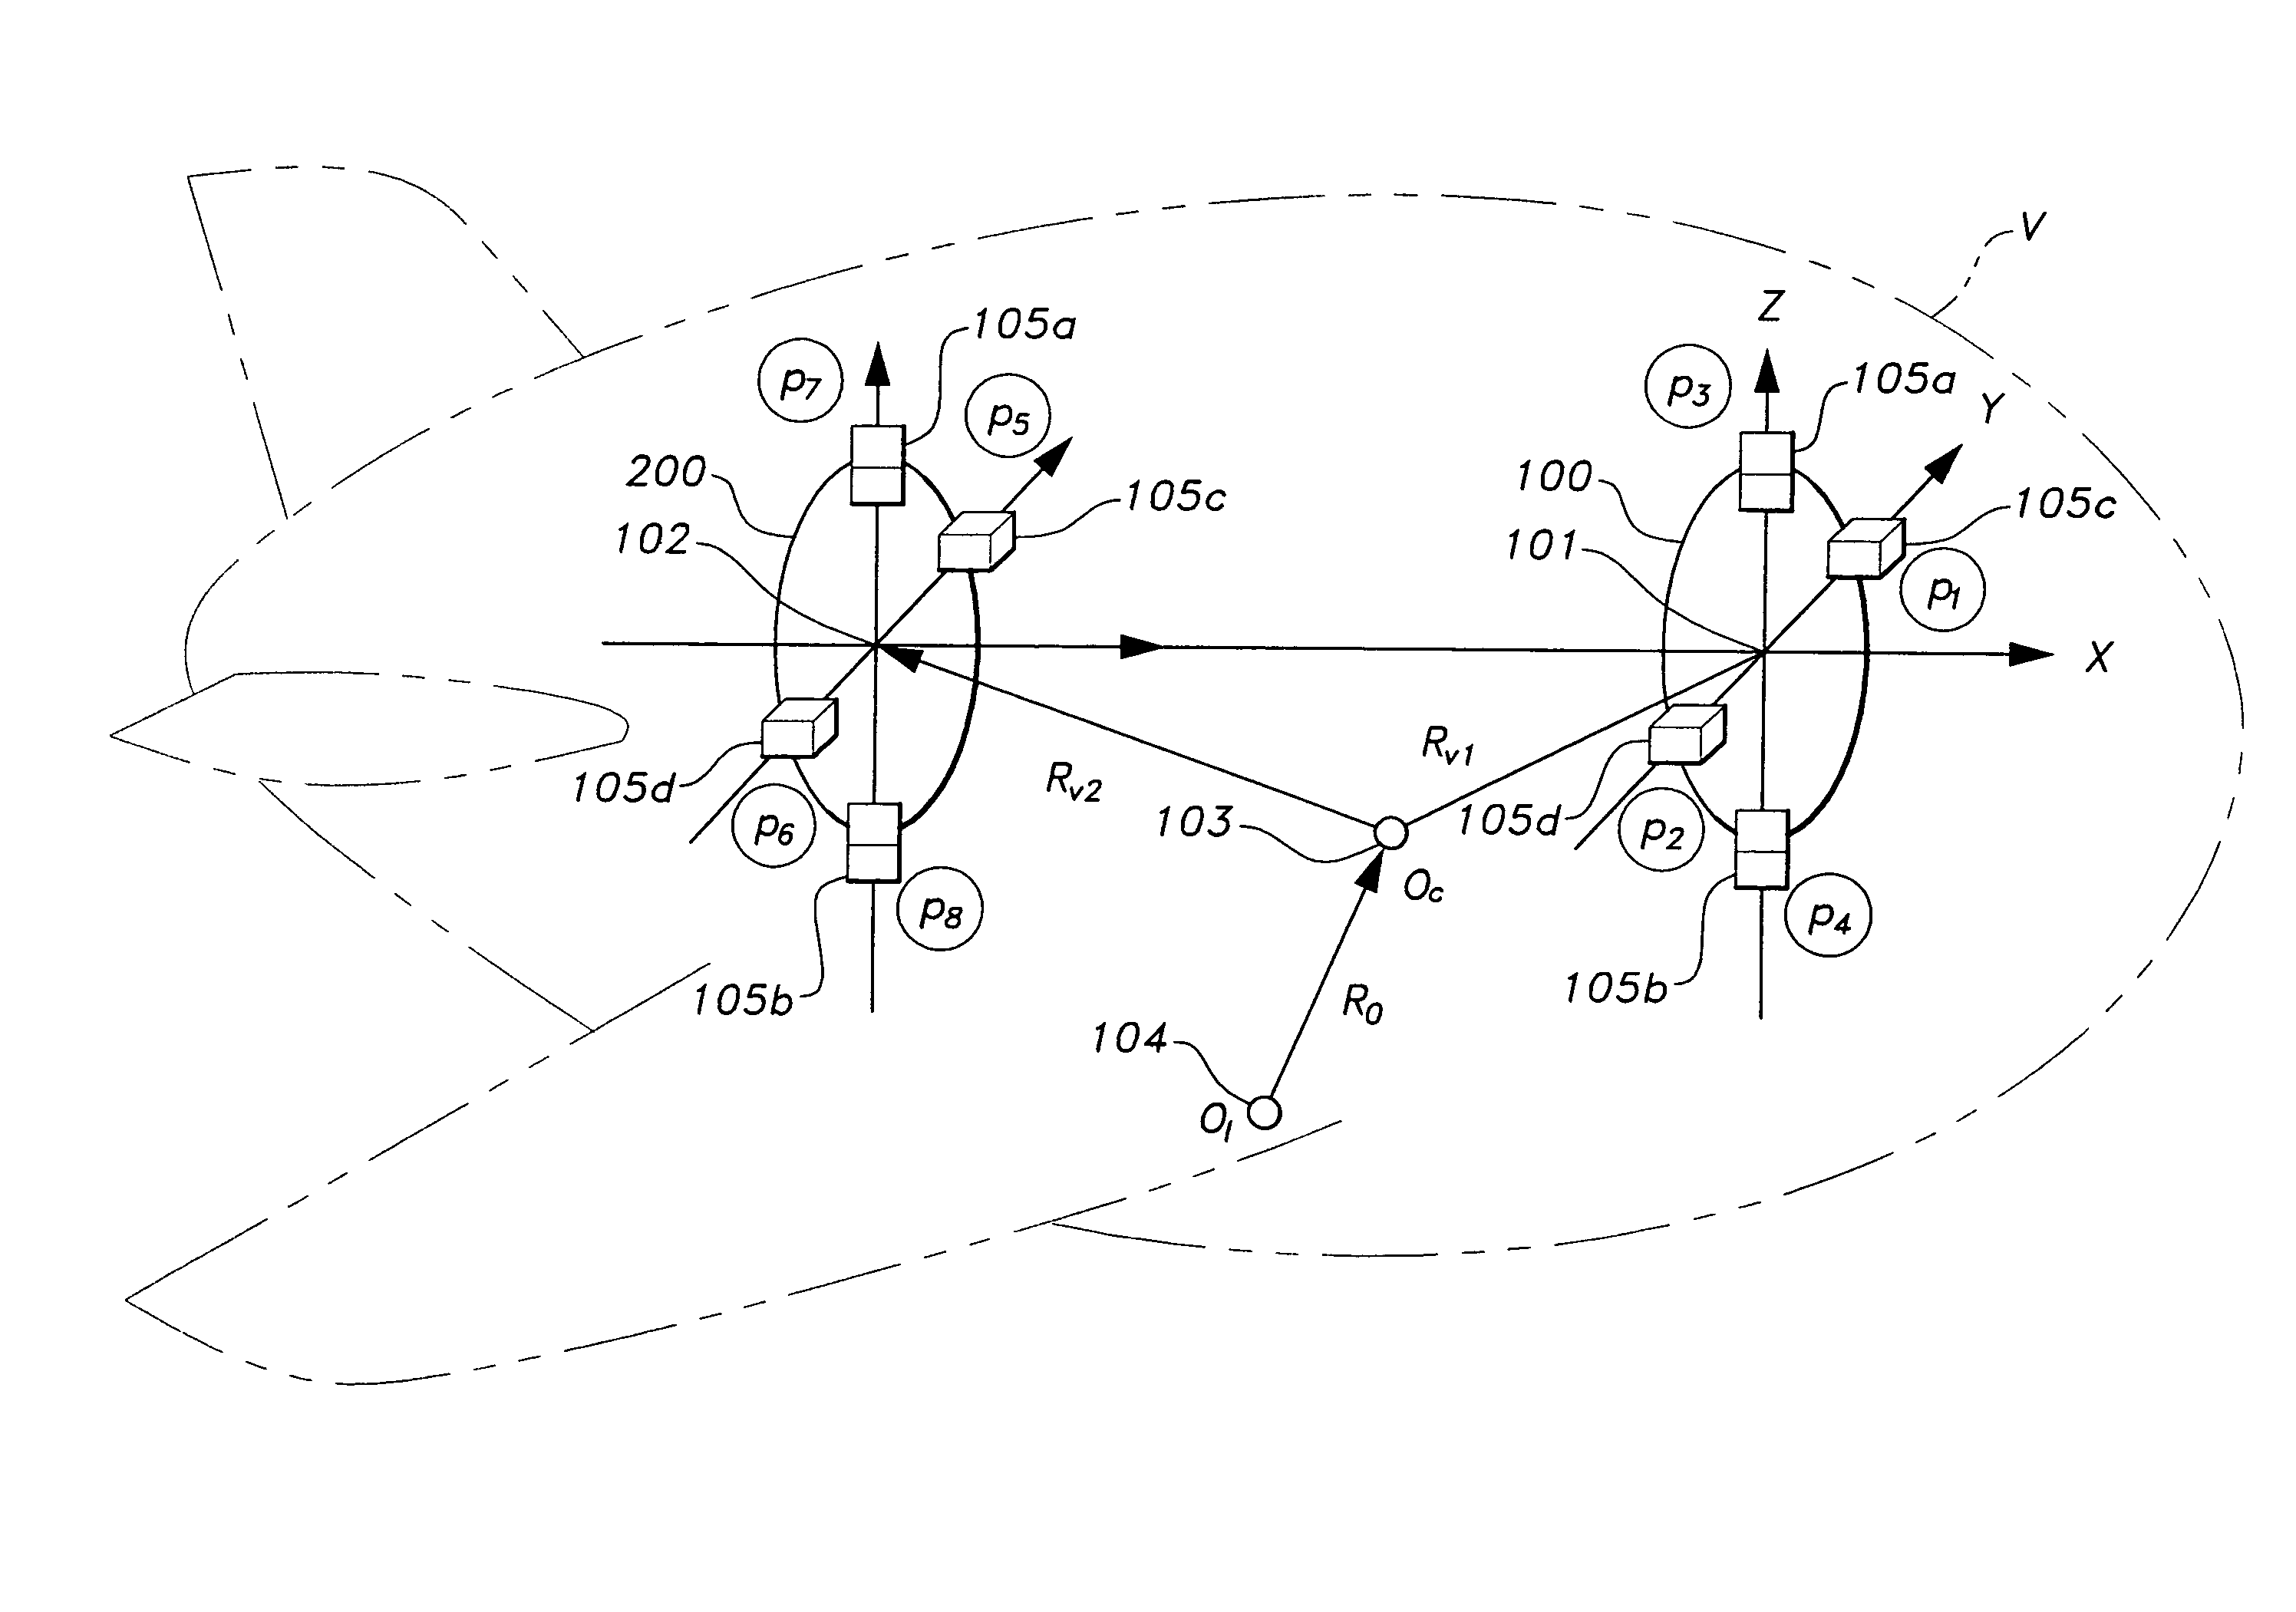 Method and apparatus for tracking center of gravity of air vehicle